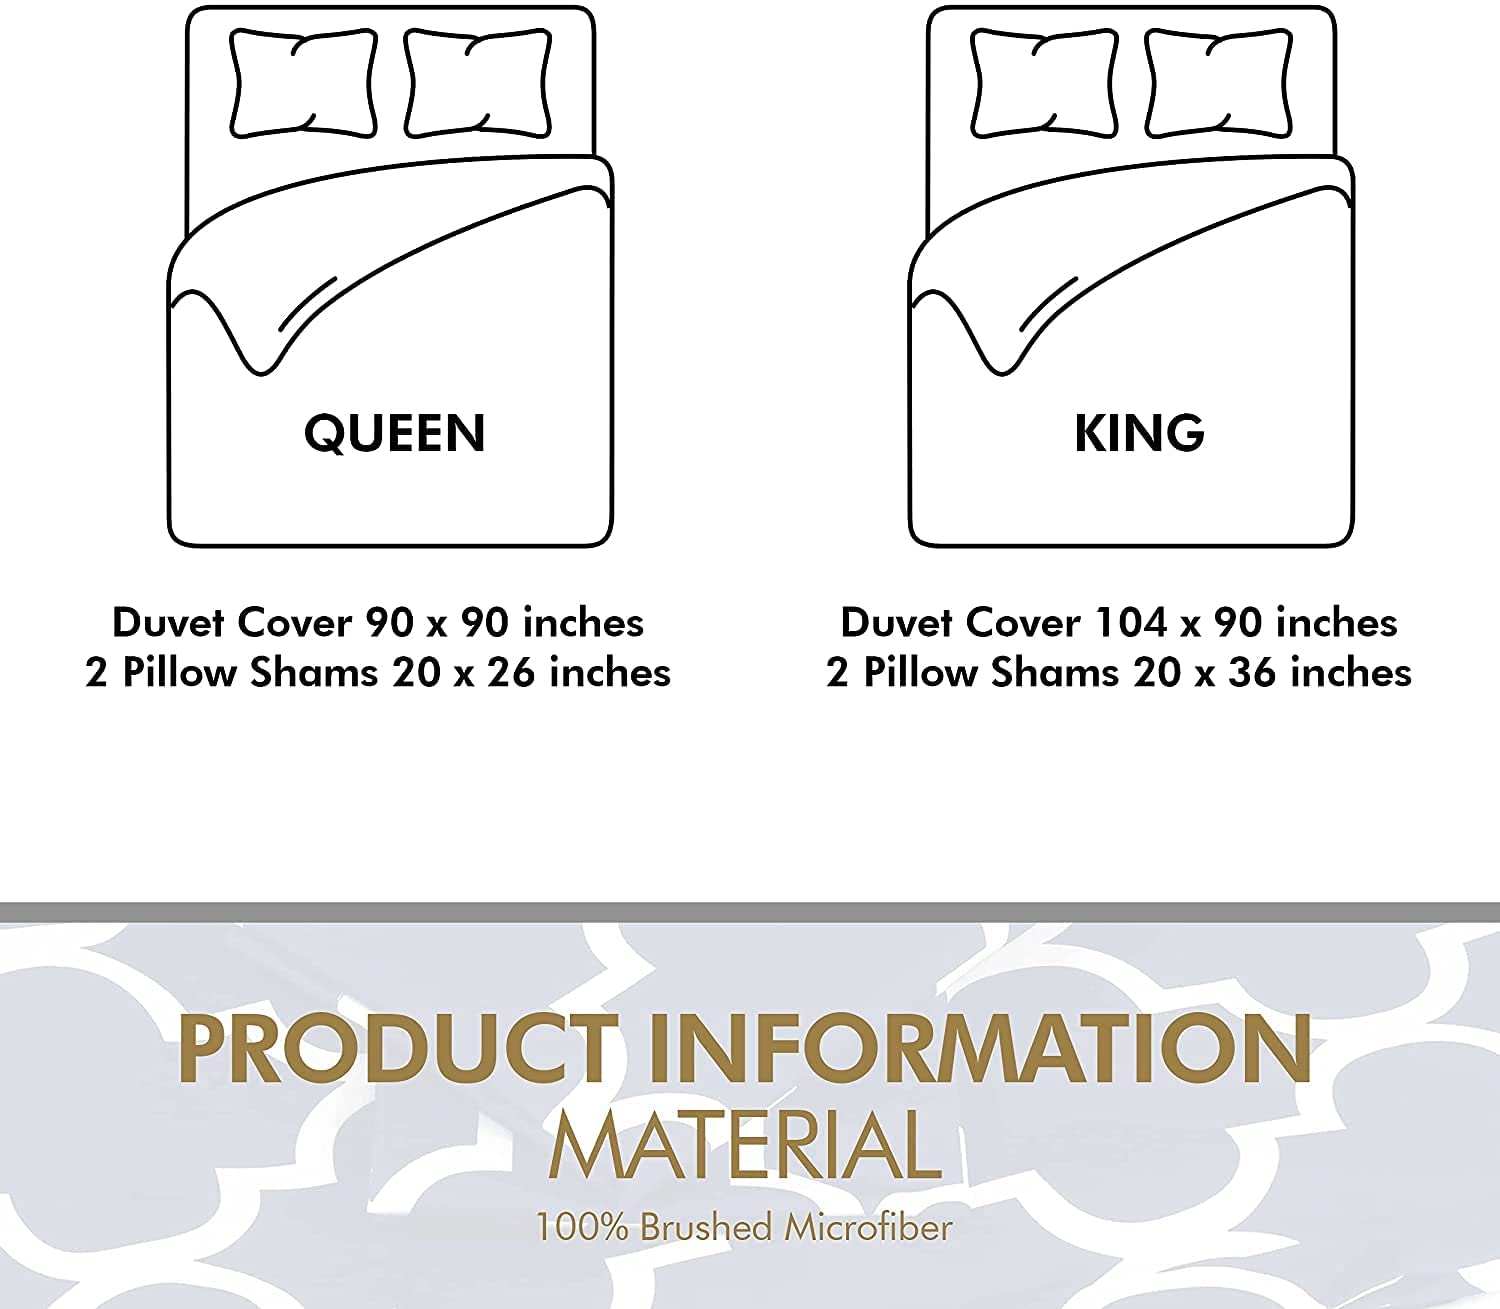 Utopia Bedding Duvet cover King Size Set - 1 Duvet cover with 2 Pillow  Shams - 3 Pieces comforter cover with Zipper closure - Ul